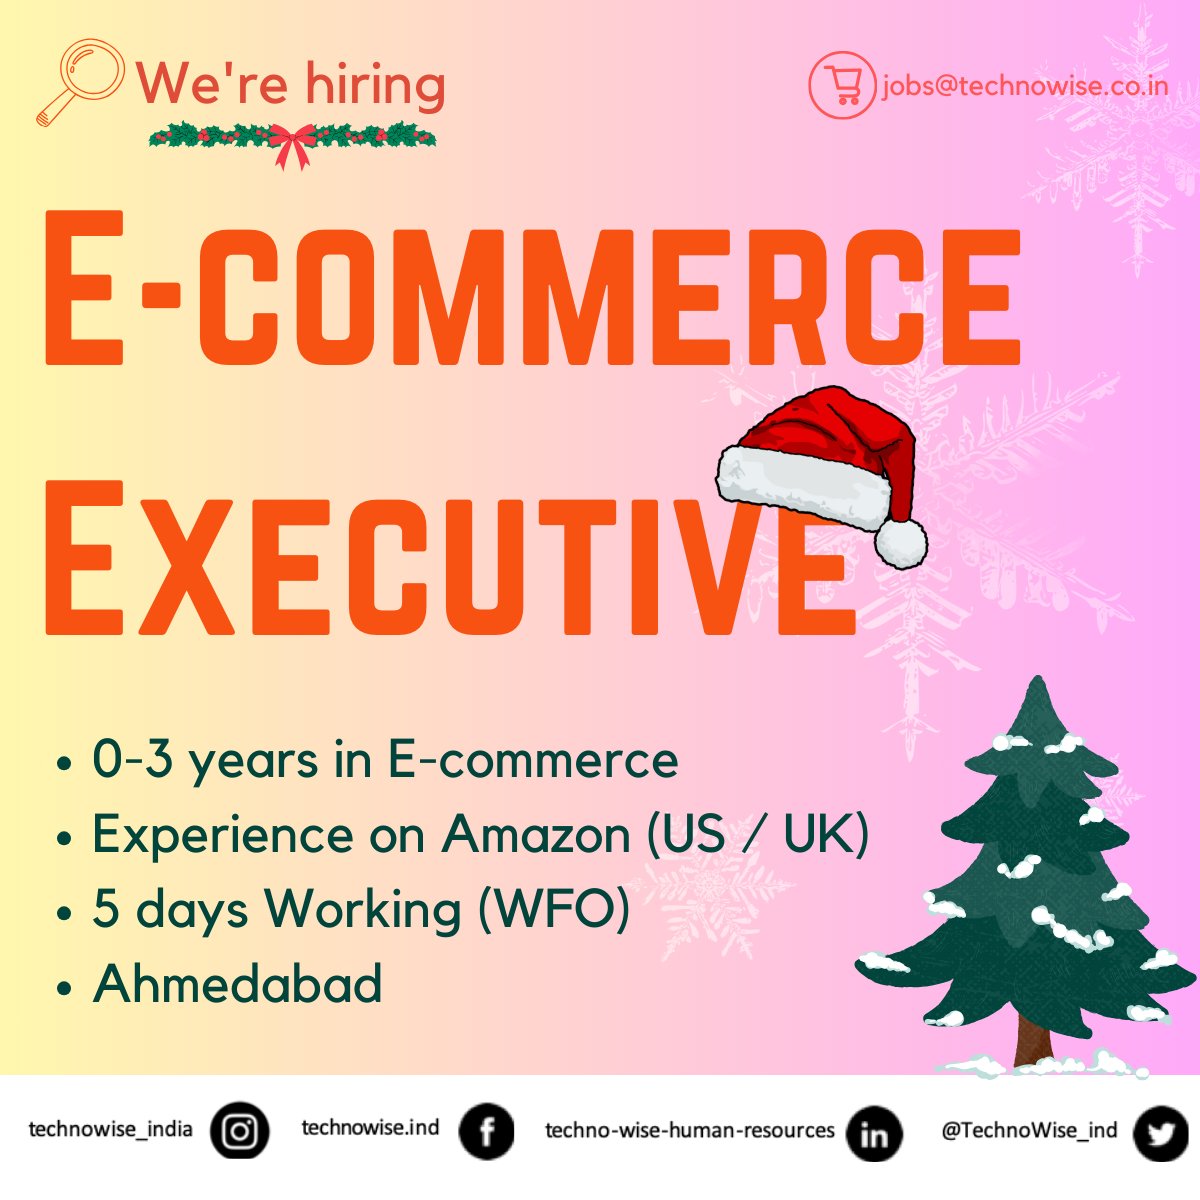 🎅🏼 𝗛𝗼 𝗛𝗼 𝗛𝗼... we're hiring 𝐄-𝐂𝐨𝐦𝐦𝐞𝐫𝐜𝐞 𝐄𝐱𝐞𝐜𝐮𝐭𝐢𝐯𝐞𝐬 

#ECommerce #MSExcel #AmazonSellerCentral #JobOpening #ECommerceJobs #ProductListing #Hirirngnow #Ahmedabad #Jobs

Follow: #TechnoWise_India